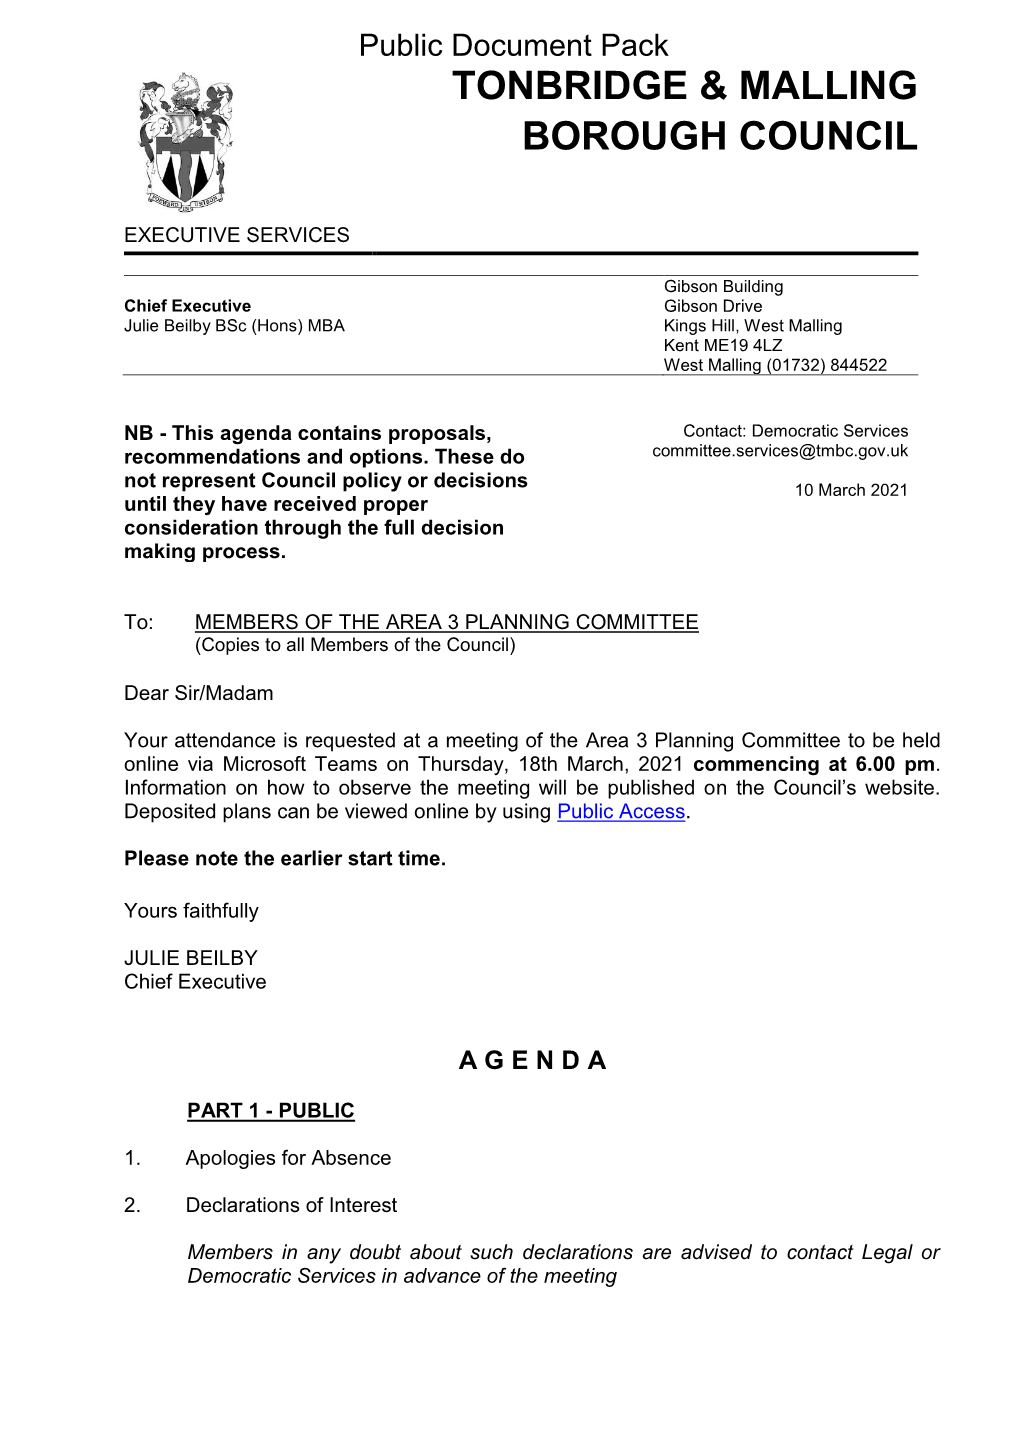 (Public Pack)Agenda Document for Area 3 Planning Committee, 18/03